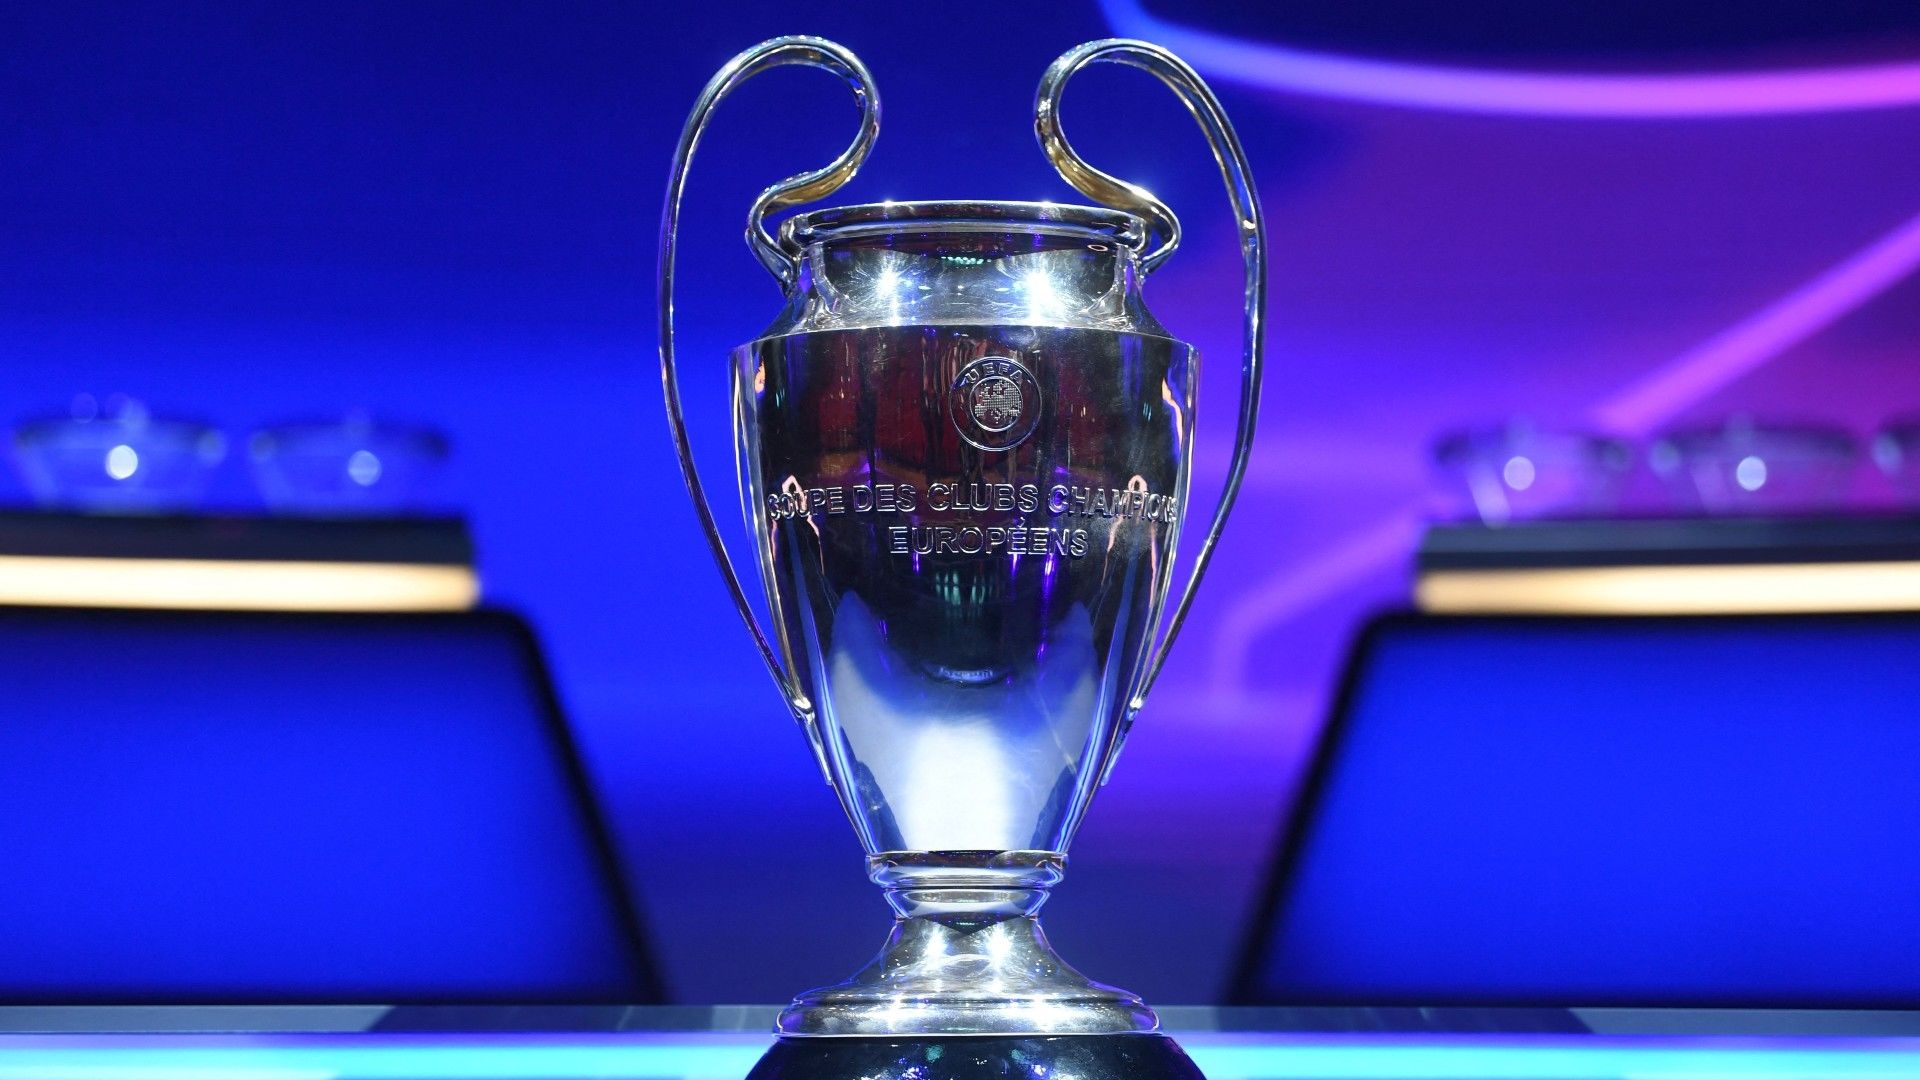 UEFA Champions League 2021/22 Round of 16 Draw - The Anfield Wrap